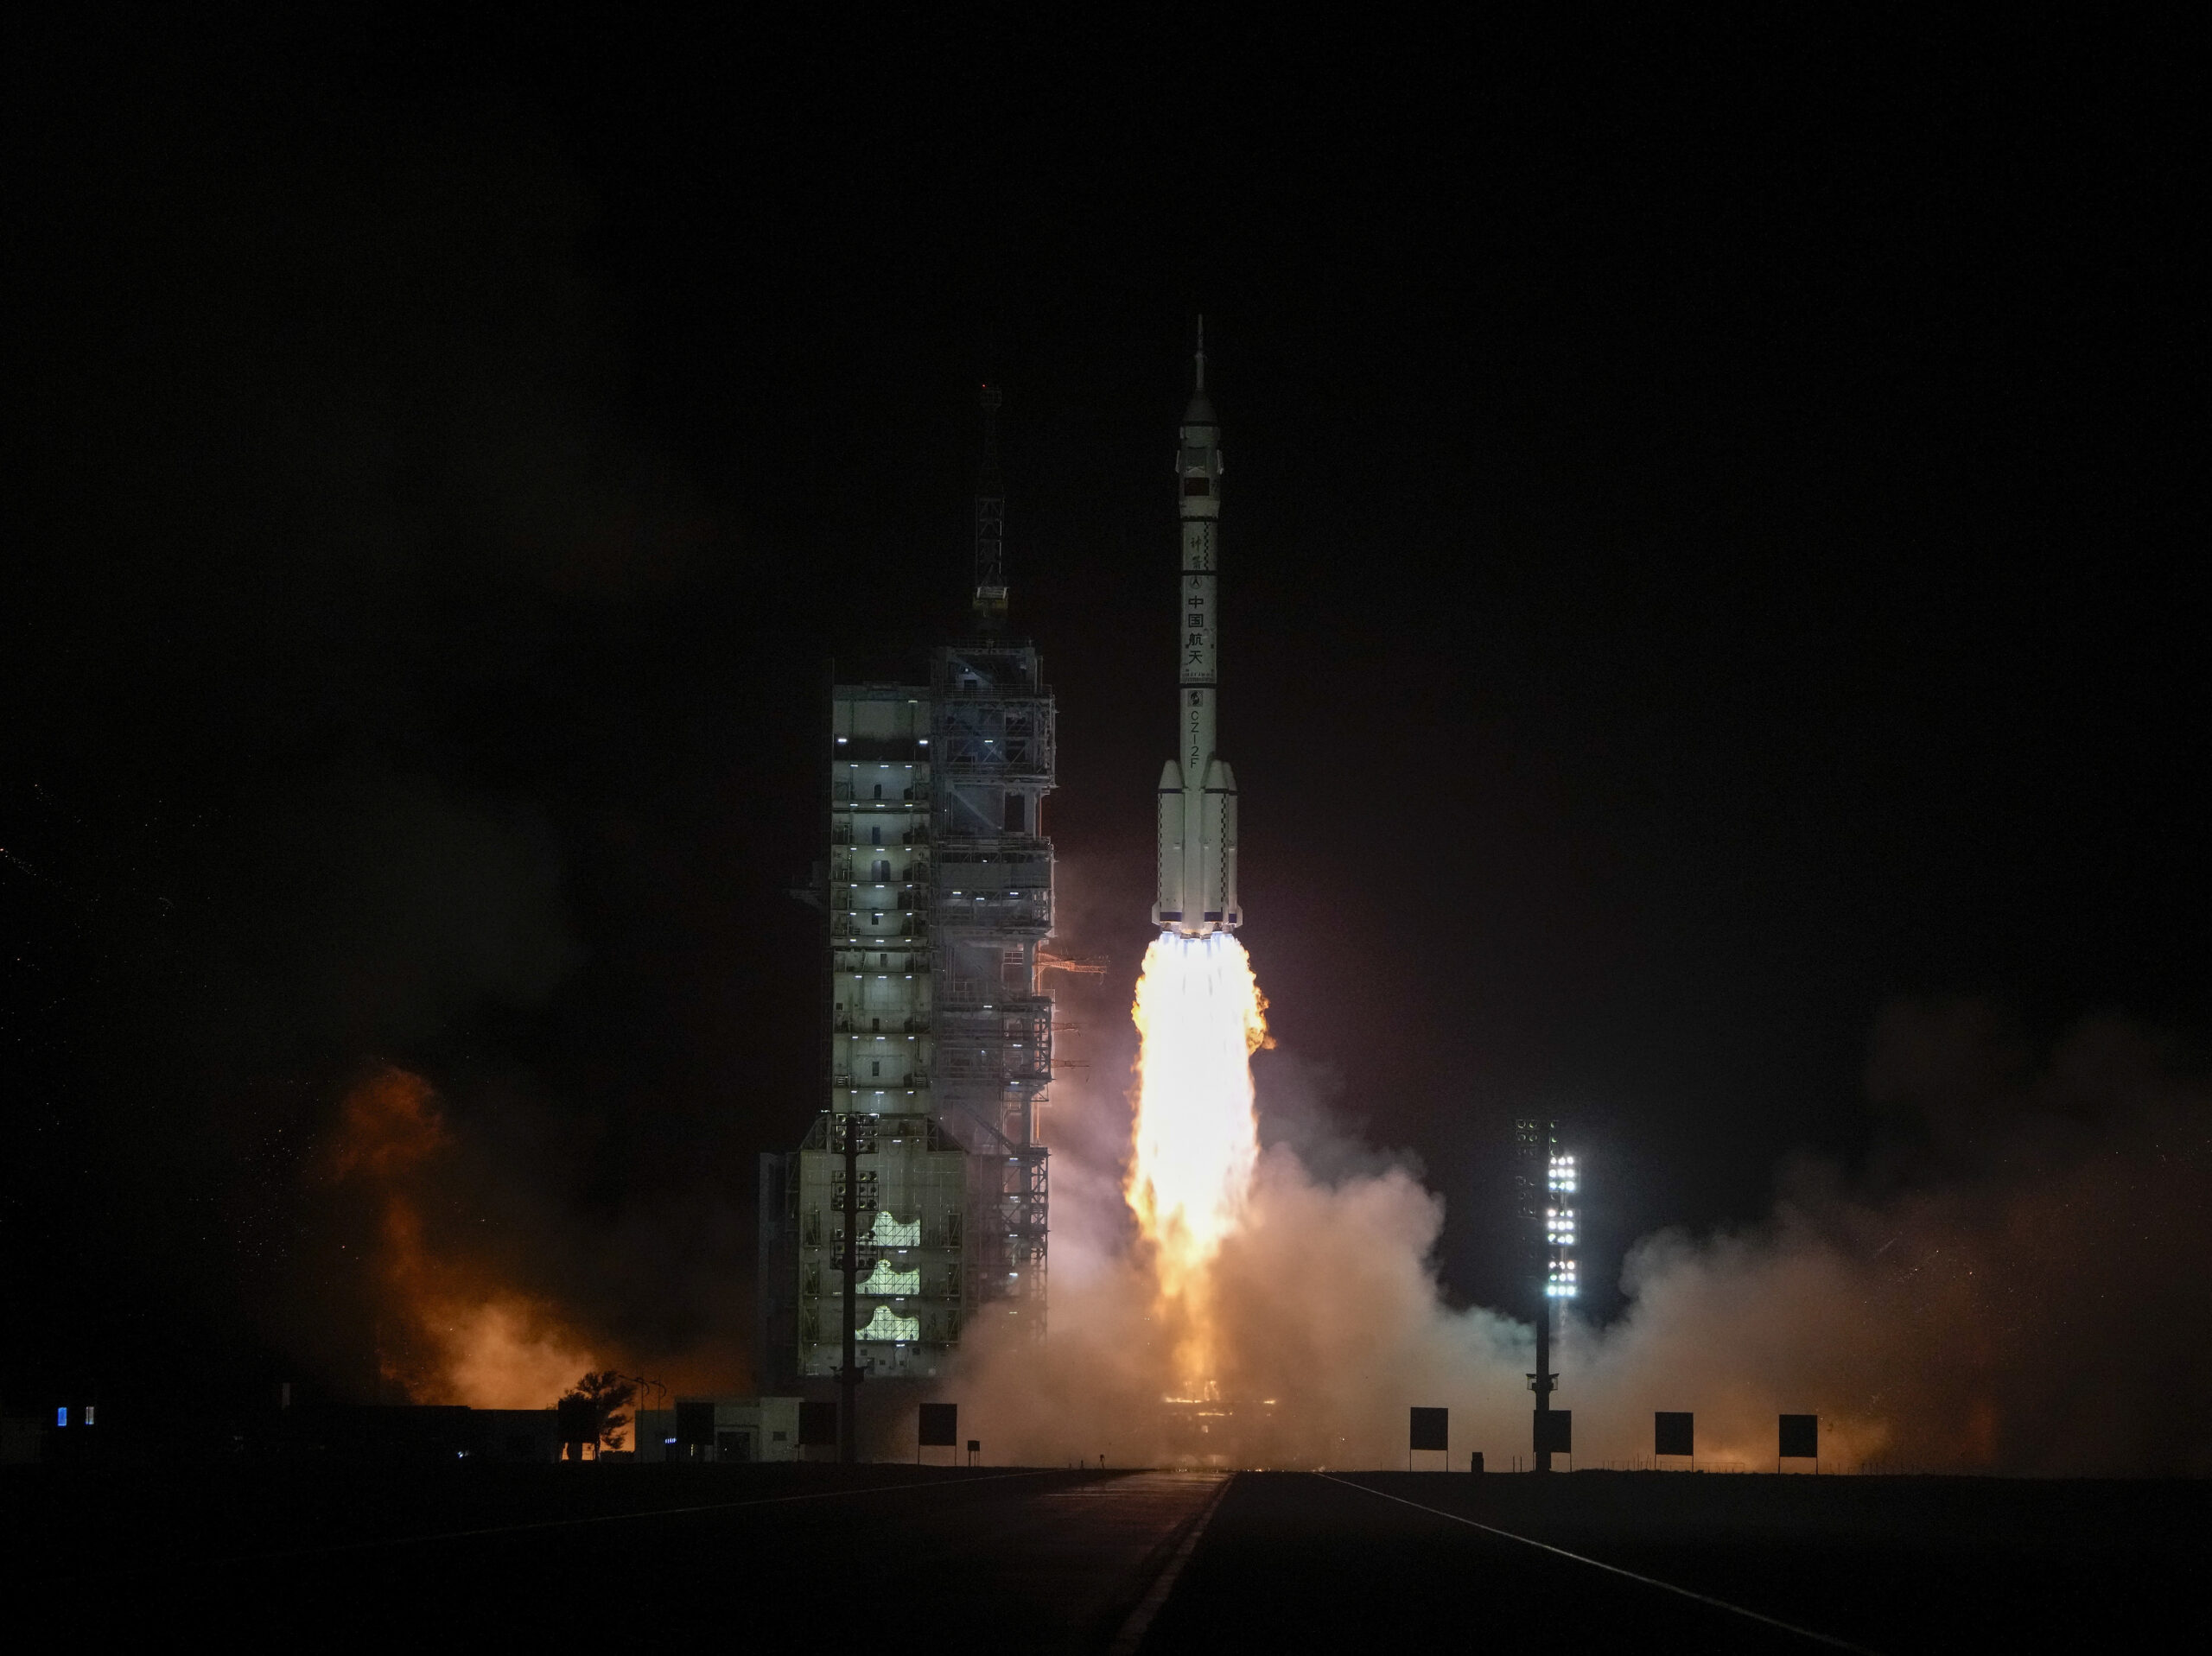 A Long March rocket carrying a crew of Chinese astronauts in a Shenzhou-18 spaceship lifts off at the Jiuquan Satellite Launch Center in northwestern China on Thursday.